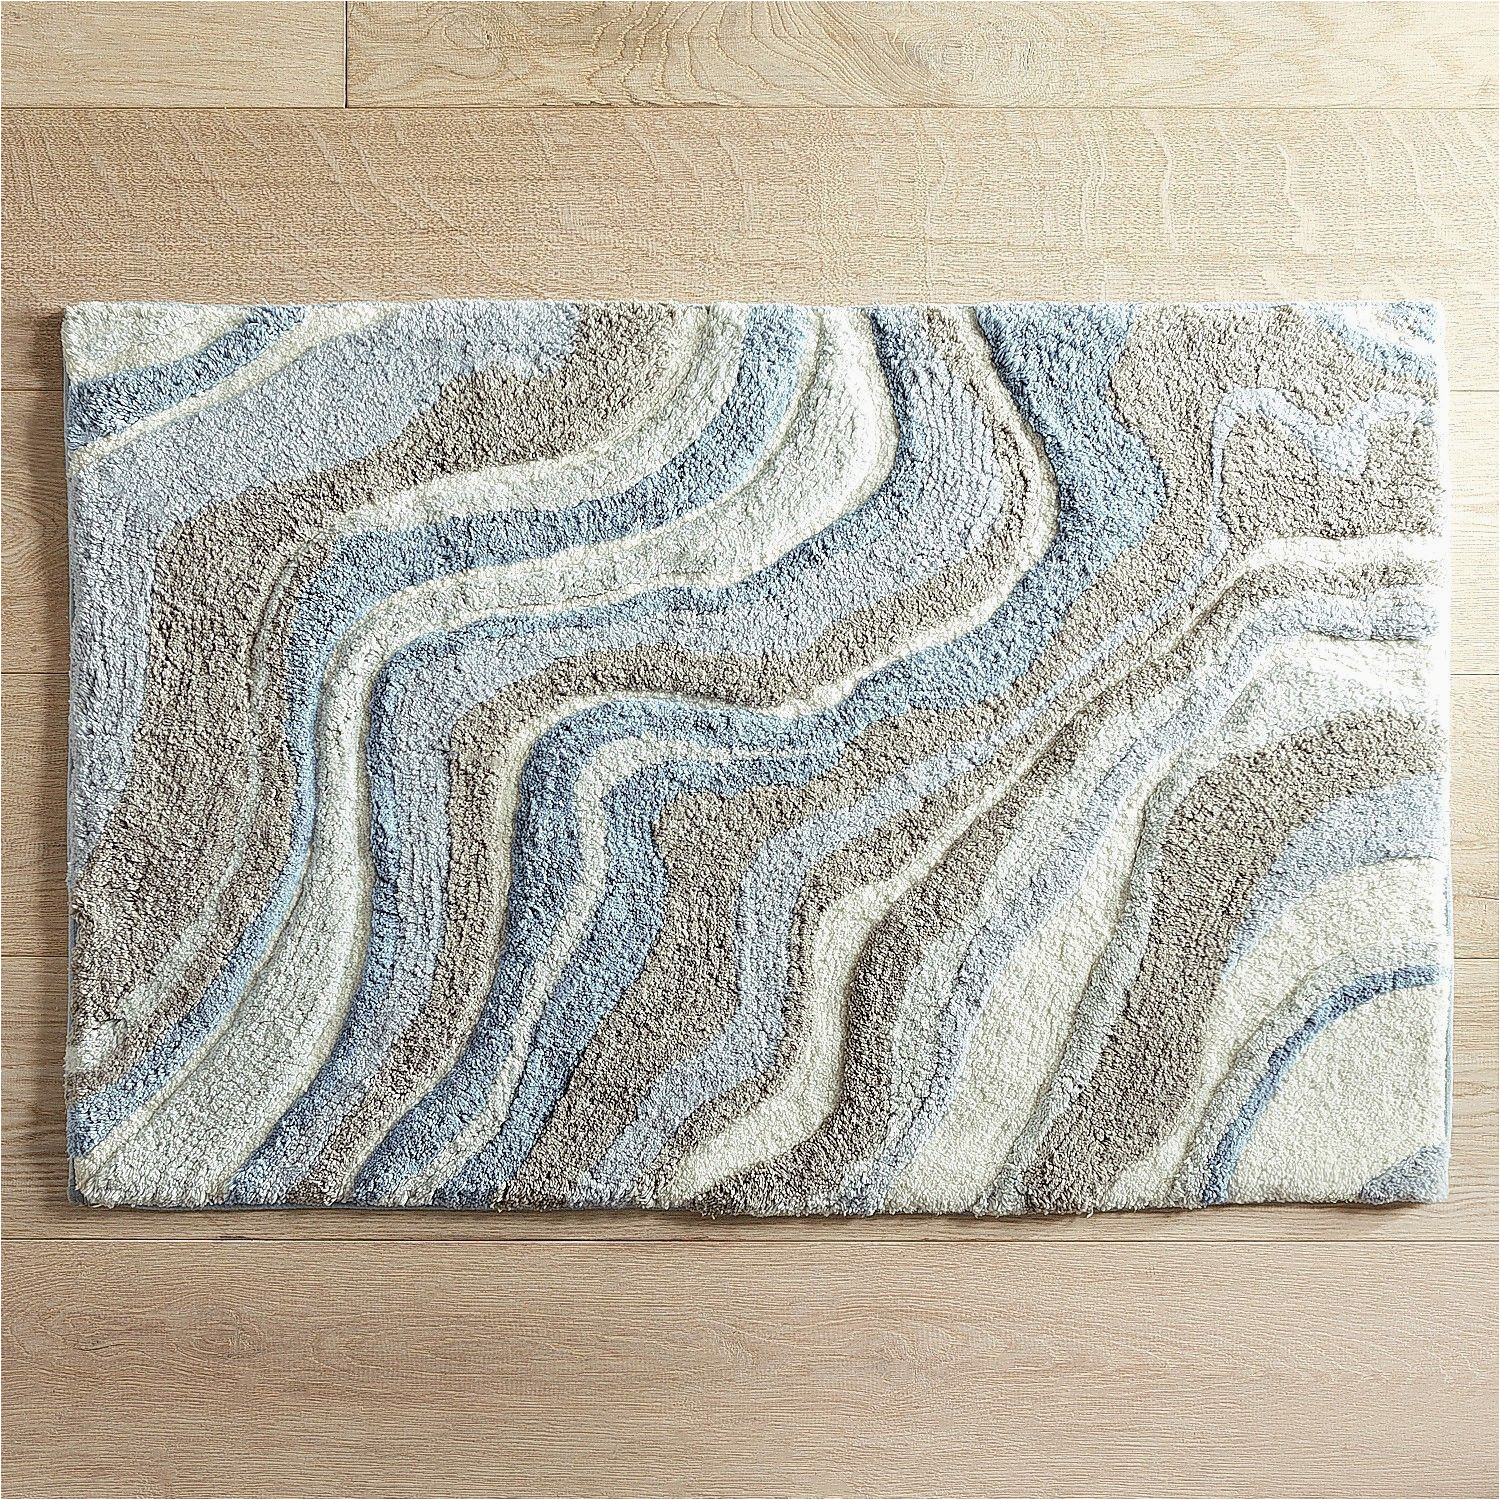 Blue and Gray Bathroom Rugs Blue and Gray Bathroom Rugs